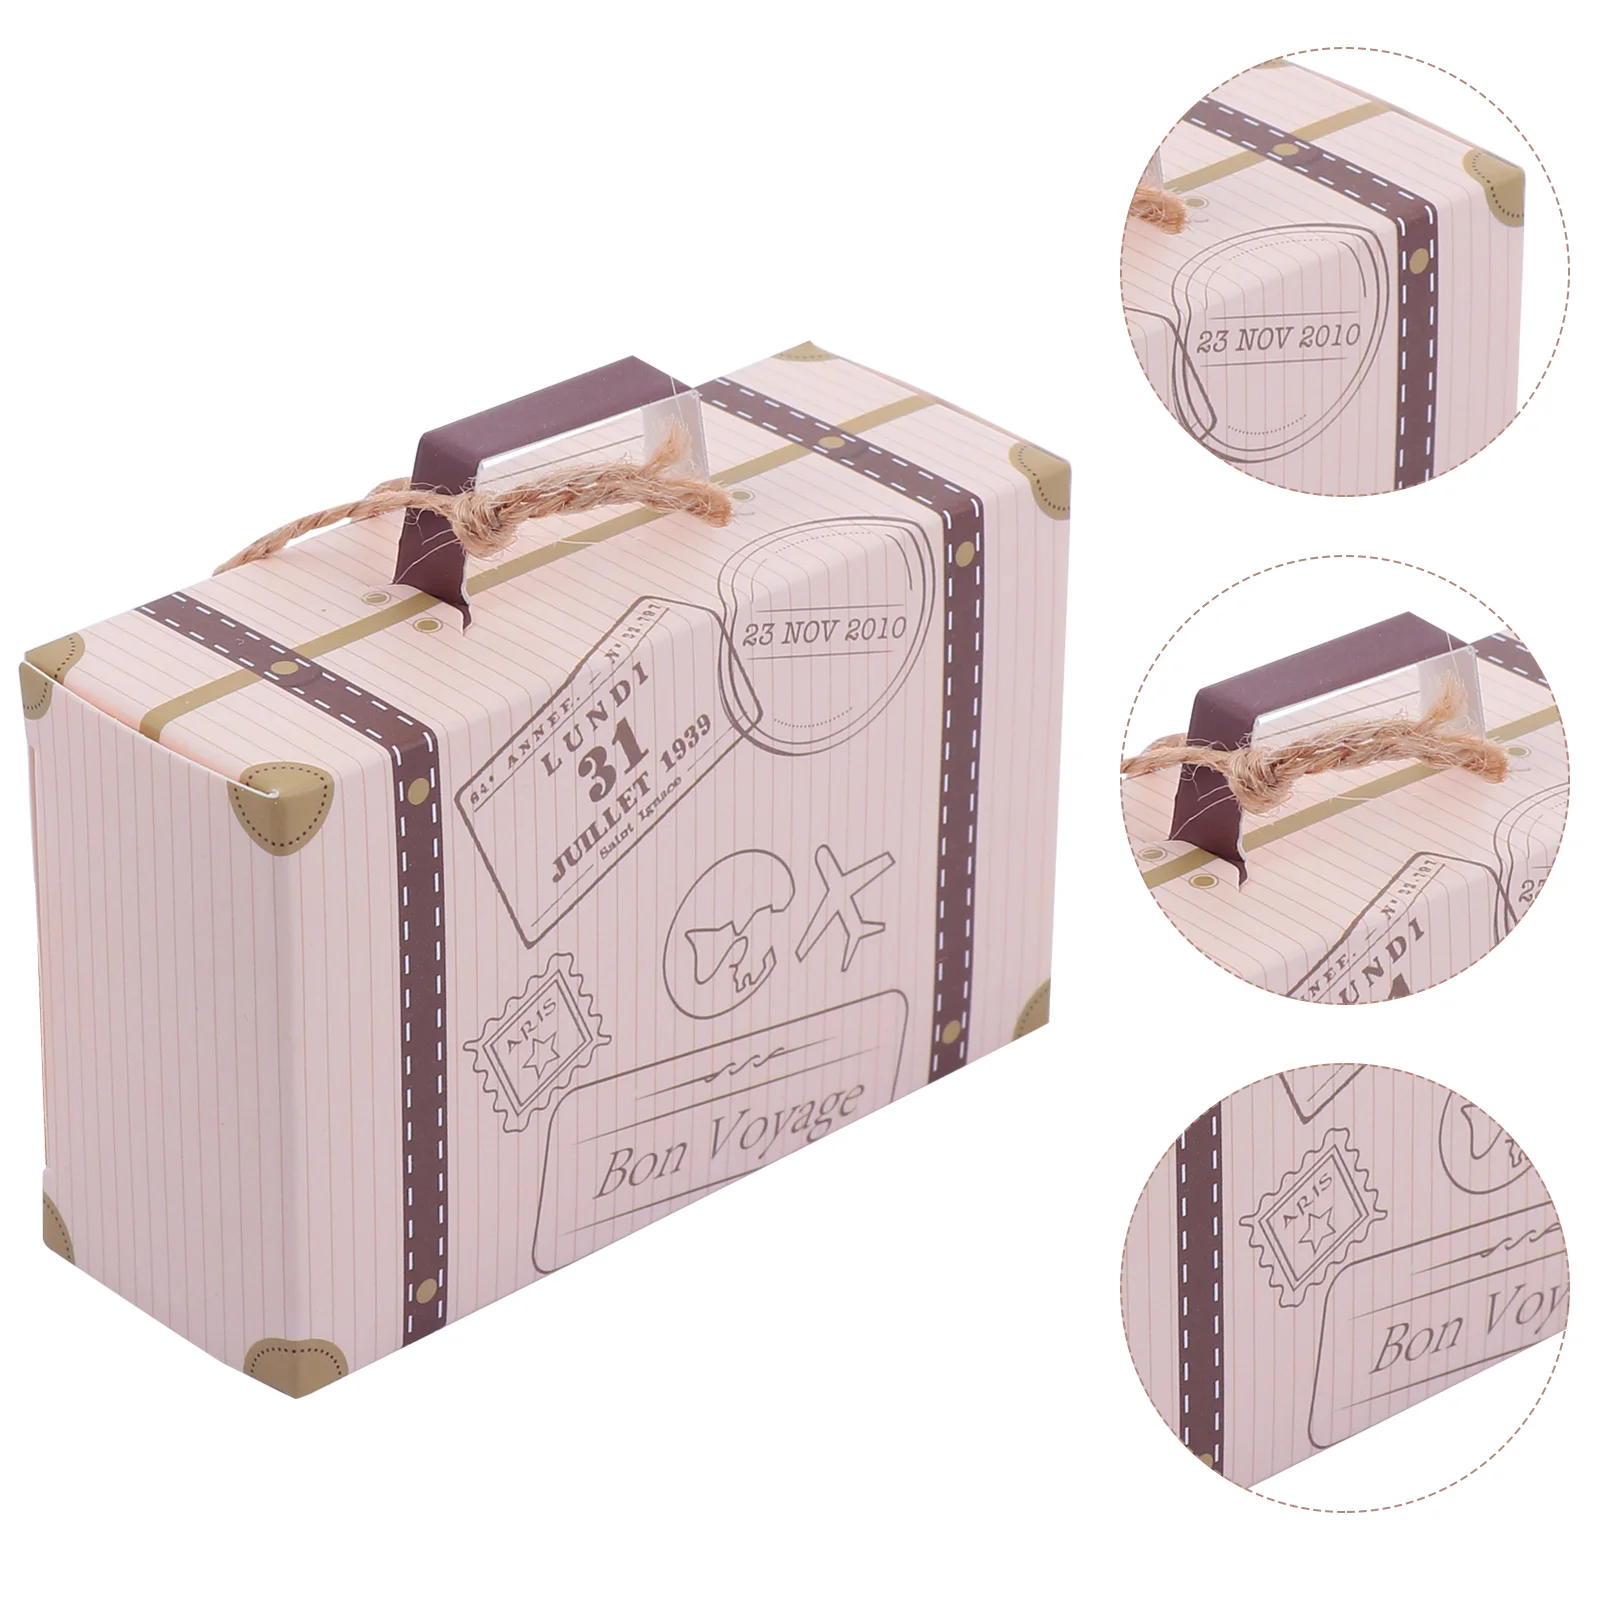 

Box Candy Boxes Christmas Gift Favor Chocolate Cube Mini Cookie Party Storage Paper Treat Suitcase Travel Dessert Bakery Jewelry